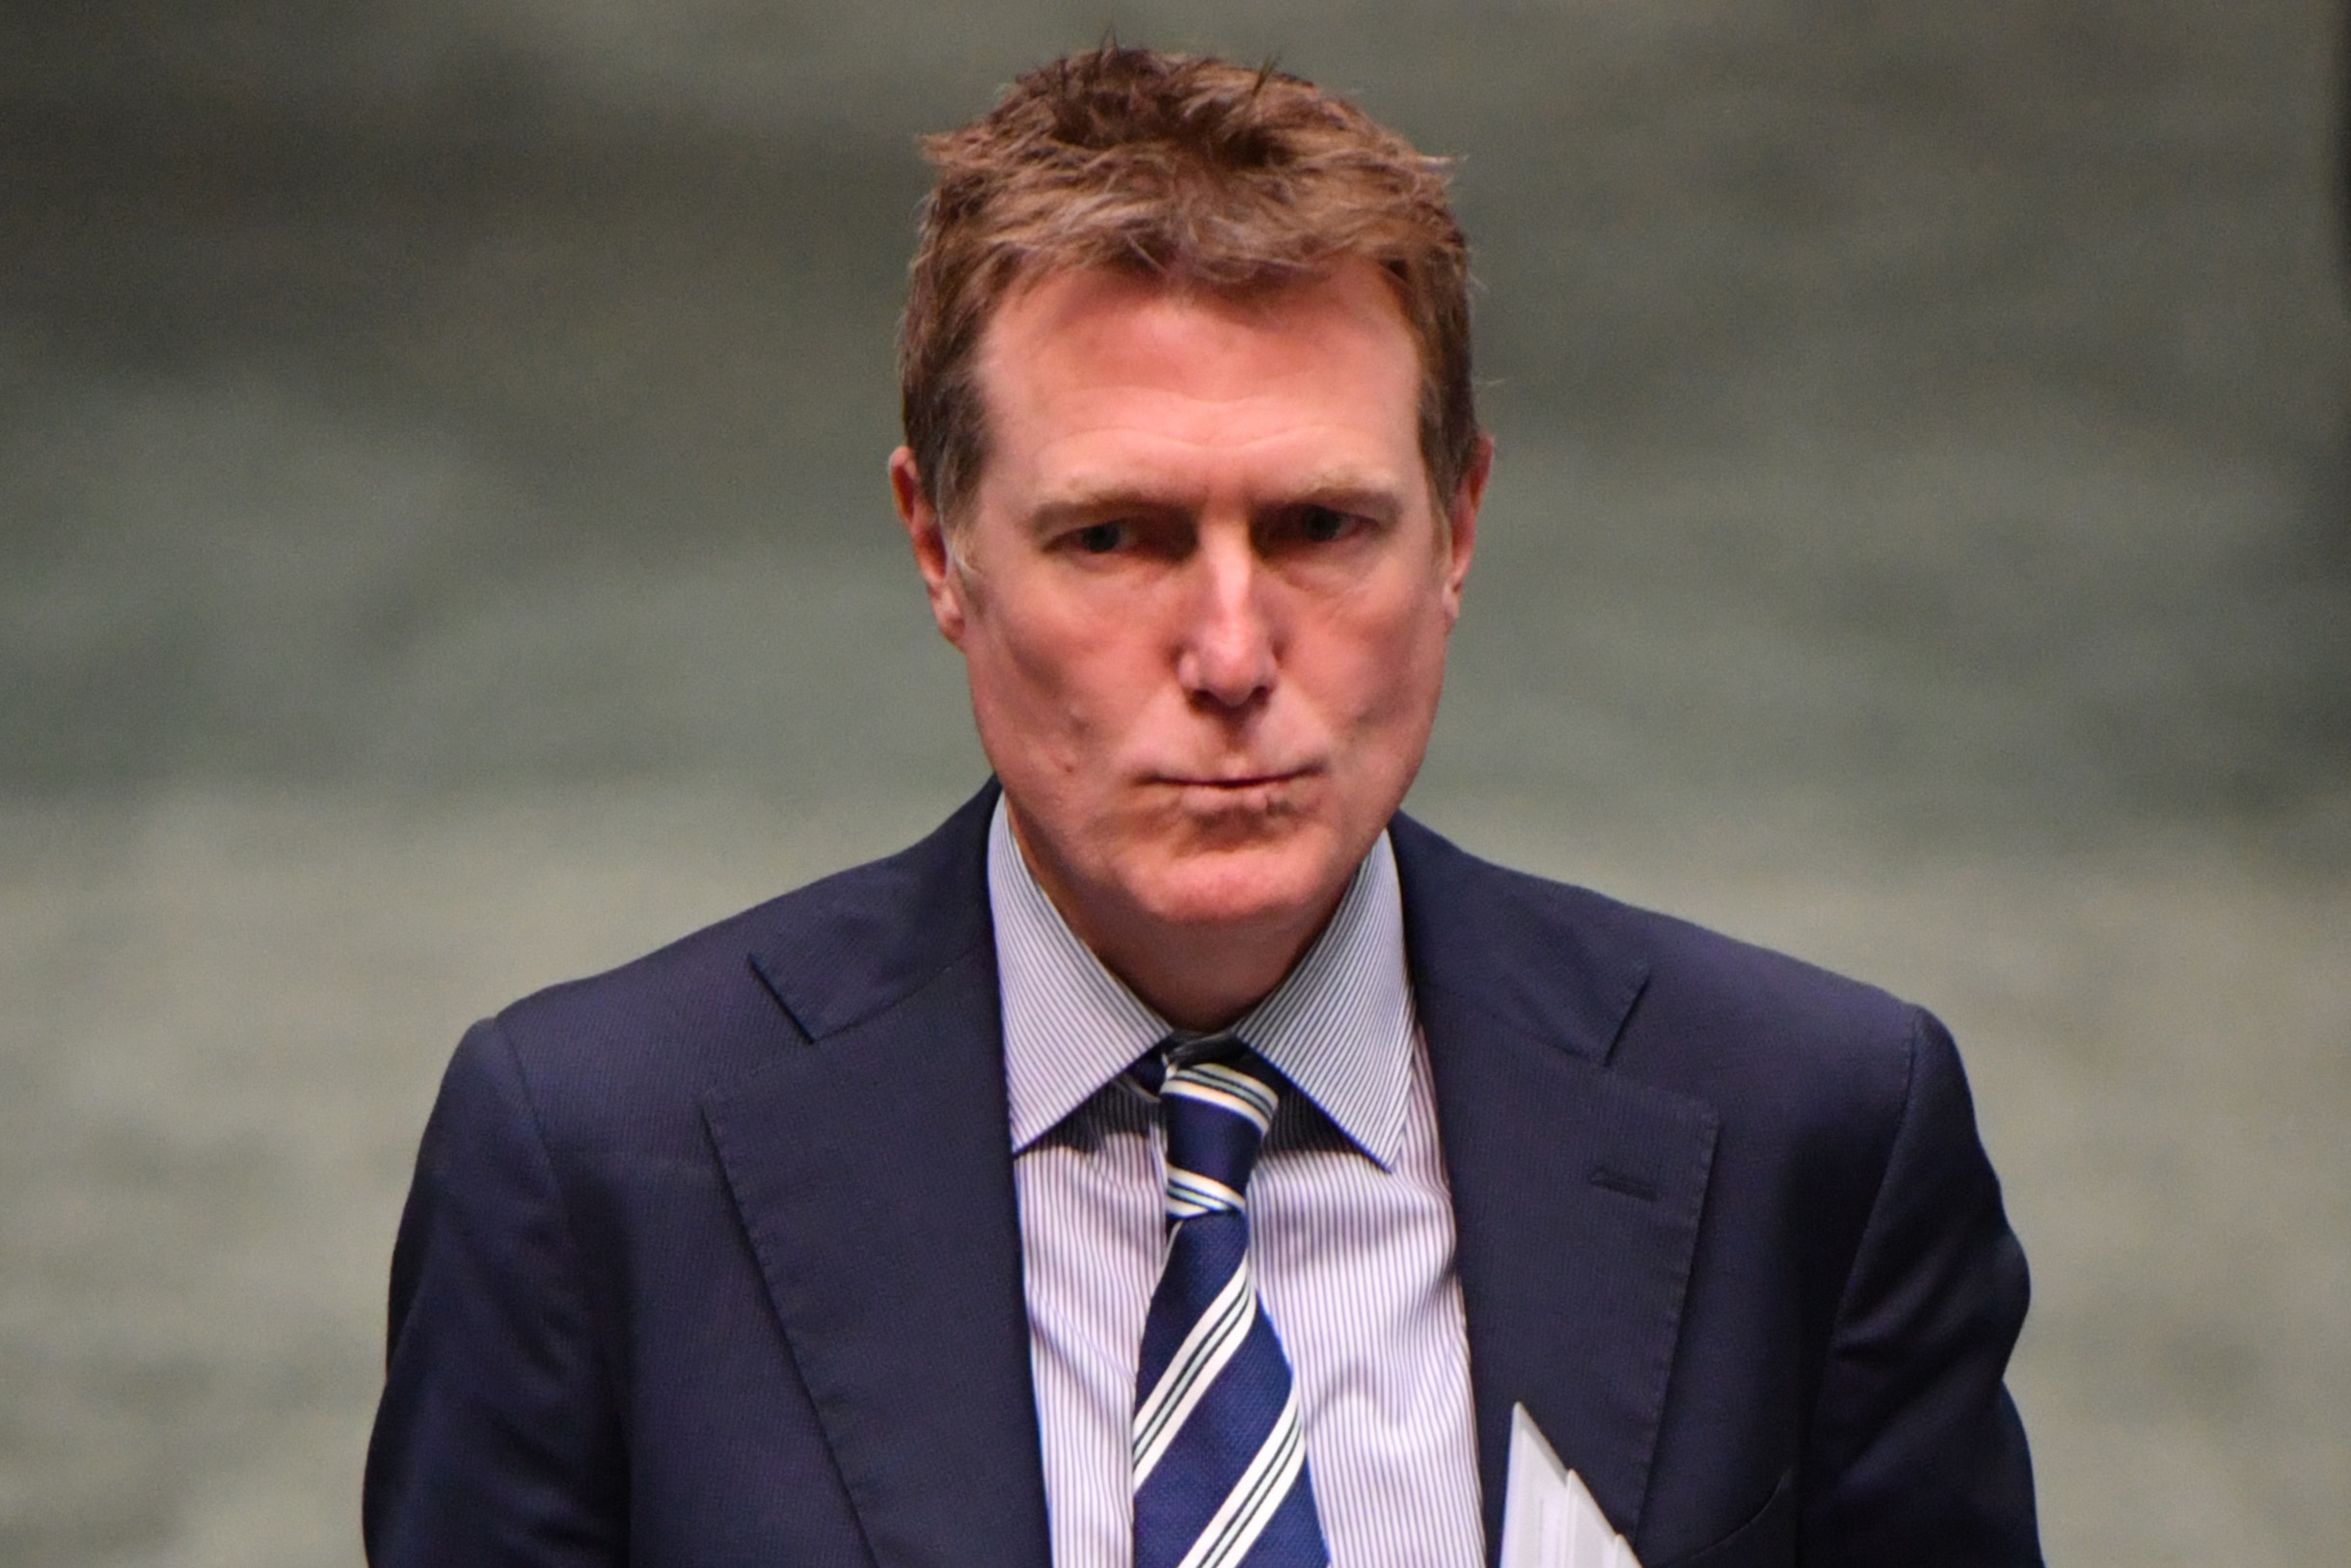 Christian Porter has identified himself as the cabinet minister at the centre of a historical rape allegation, breaking his silence to reject the claims.